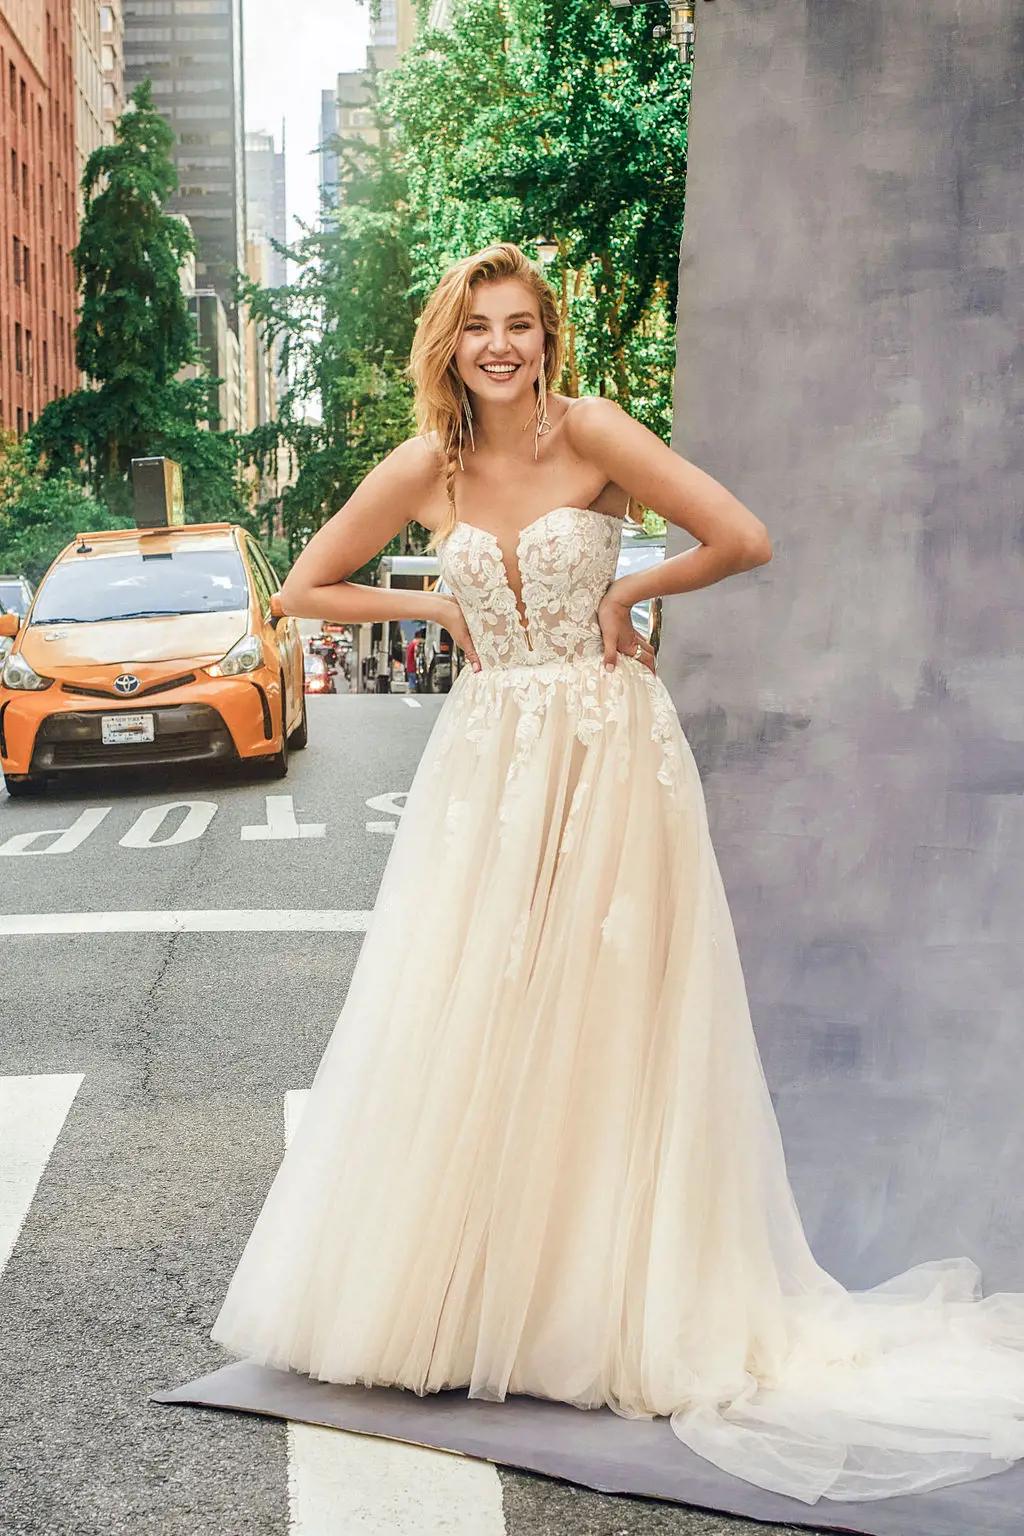 What Style Wedding Dress Should You Wear For Your Body Type Image